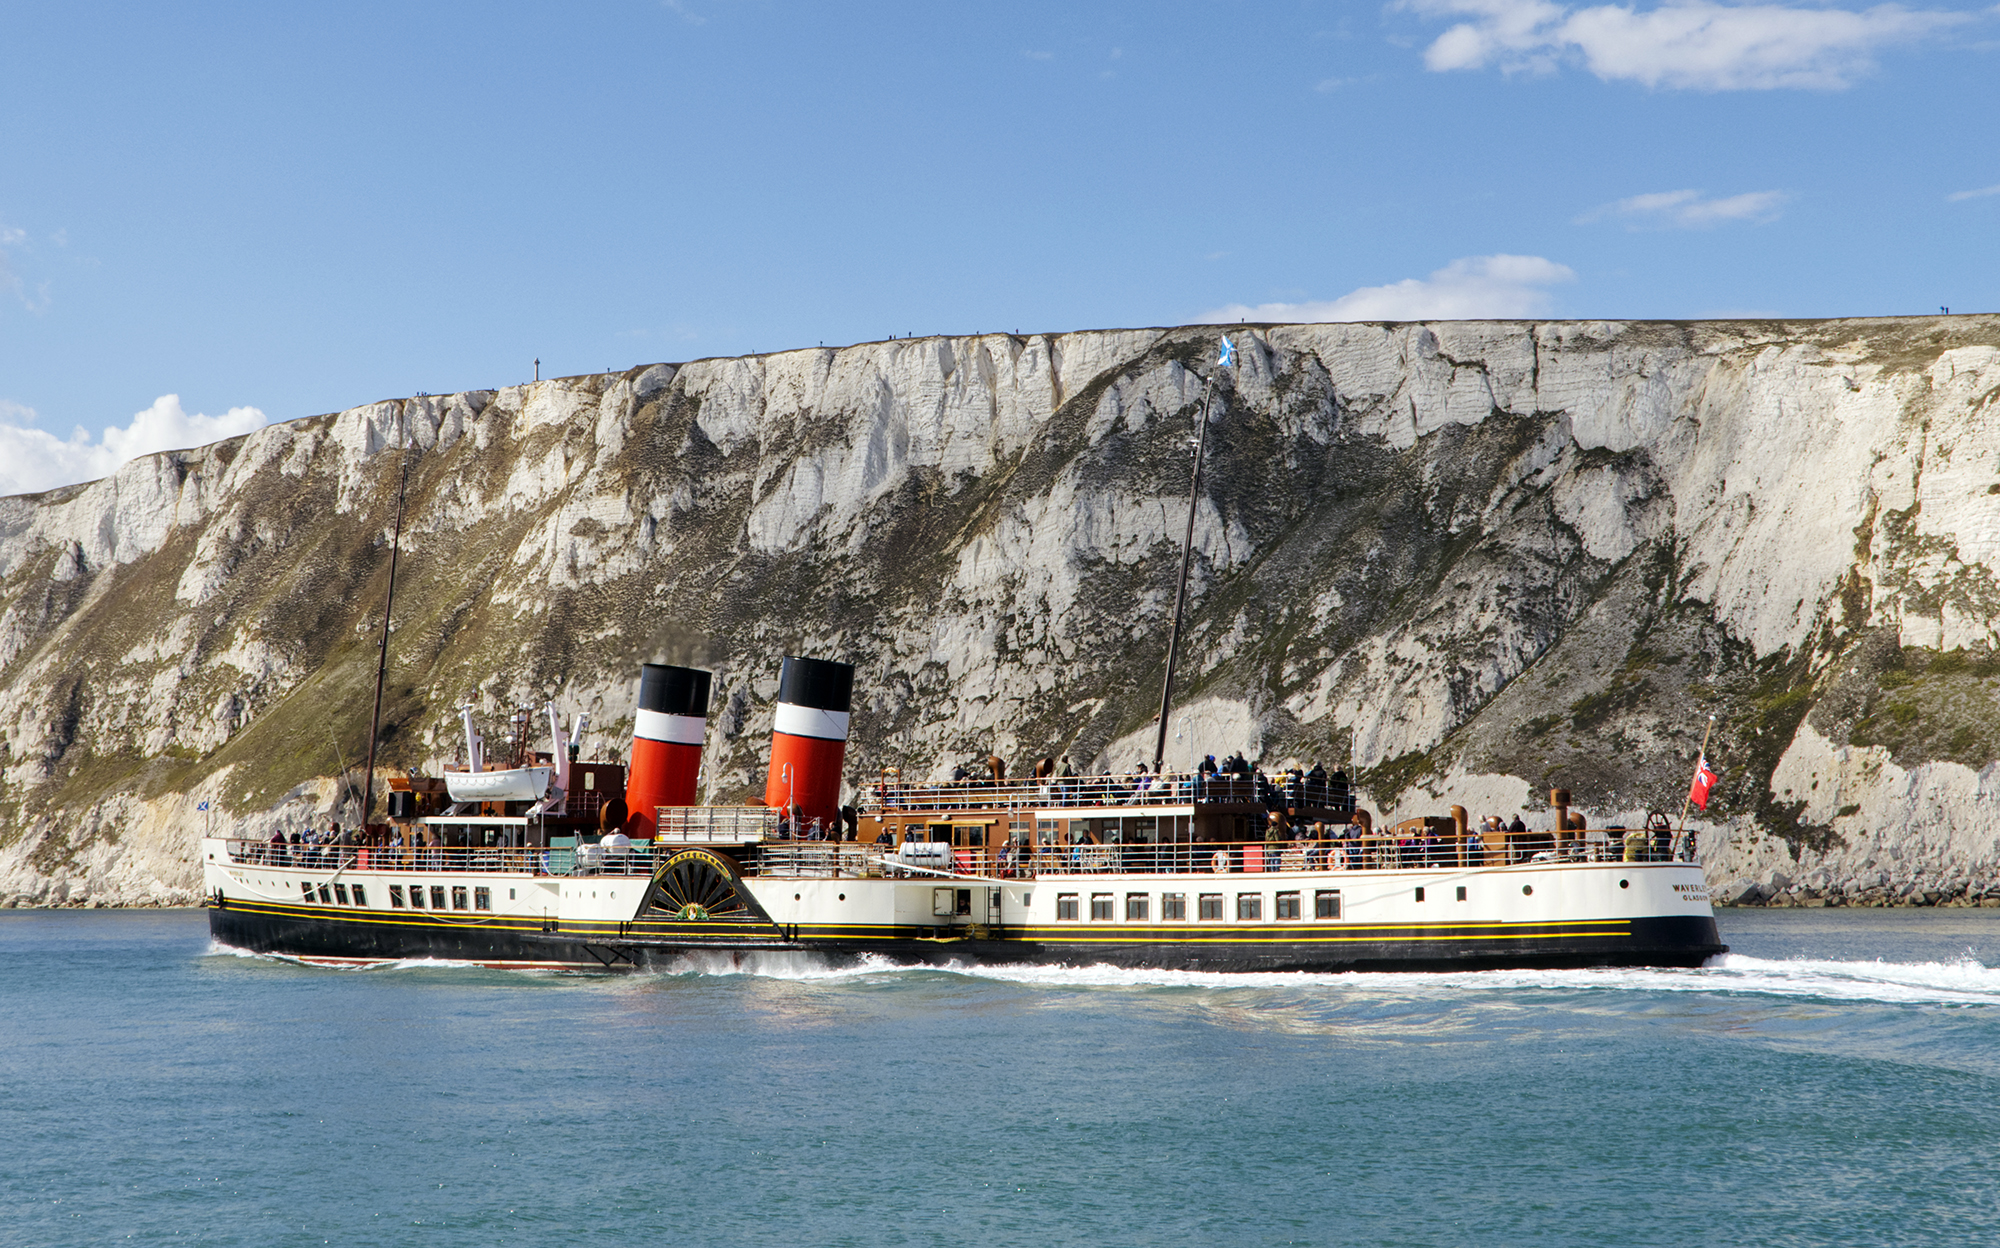 PS Waverley off the coast of the Isle of Wight